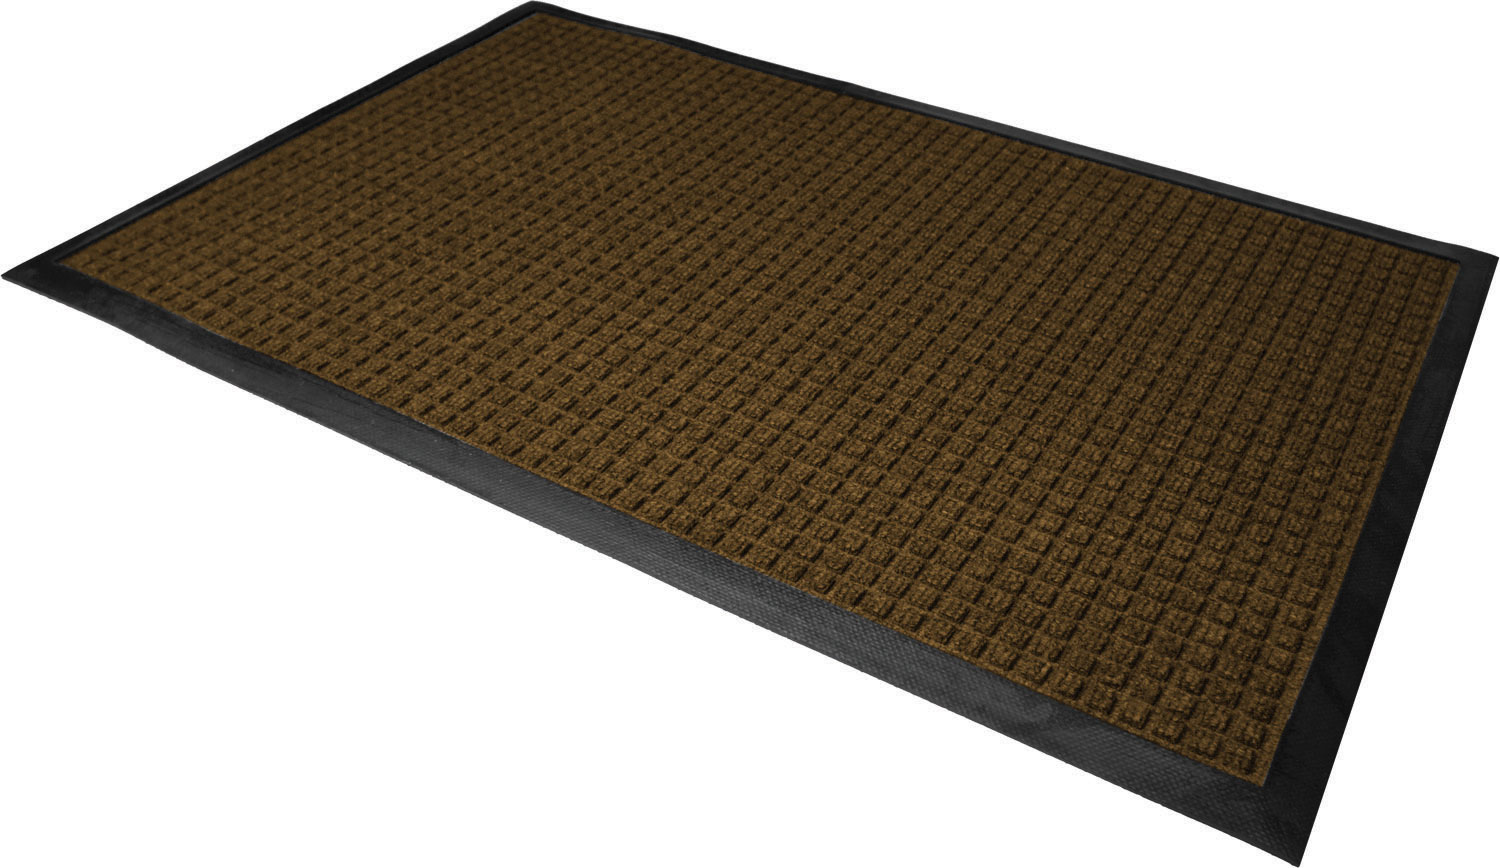 Details about   Outdoor Floor Mat Commercial Entrance Indoor Rubber Entry Rug Non Slip Brown 